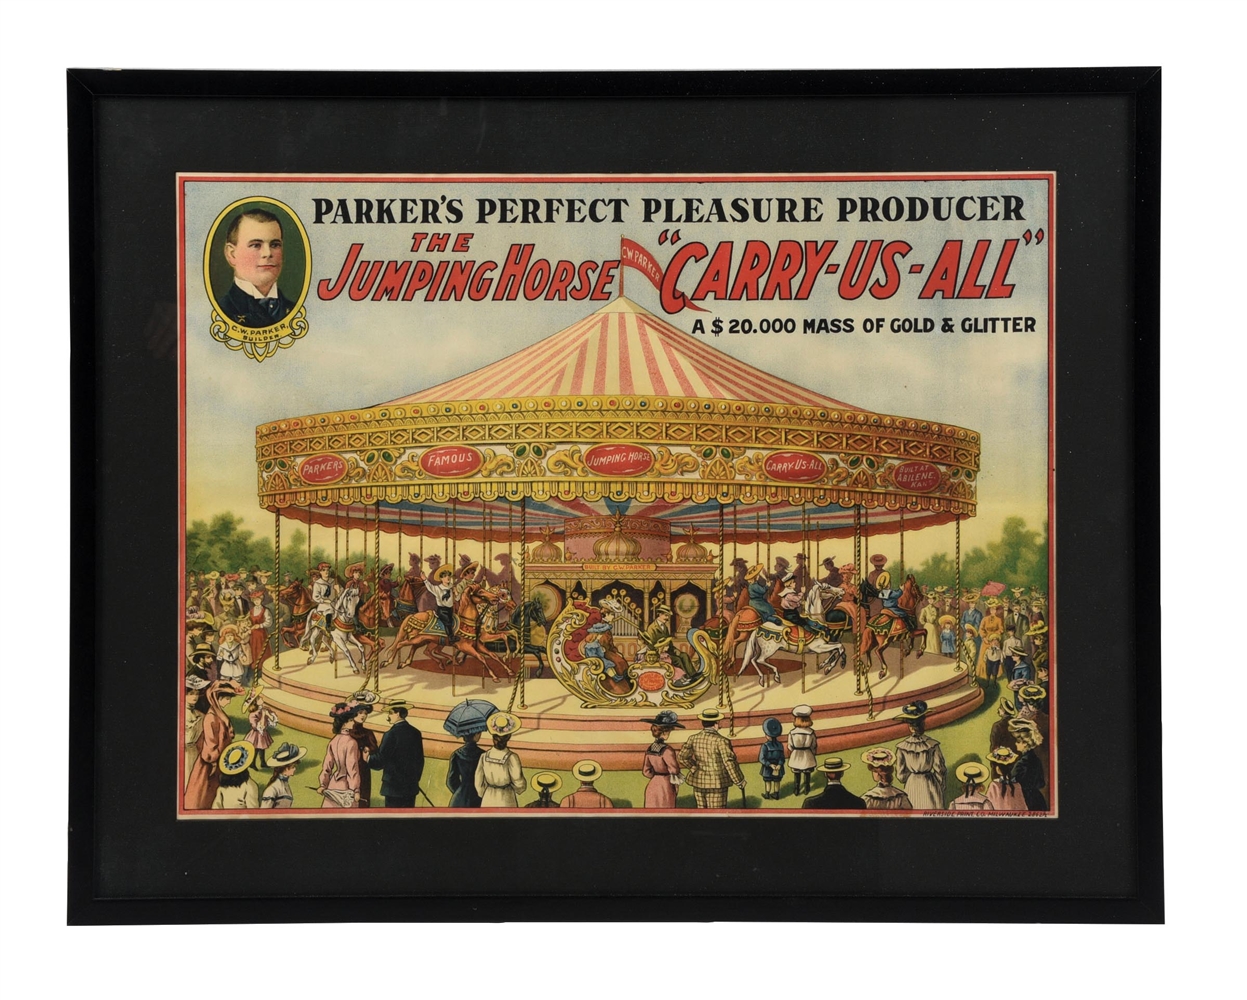 PARKER PERFECT PLEASURE PRODUCER JUMPING HORSE CAROUSEL PAPER LITHOGRAPH W/ CAROUSEL GRAPHIC